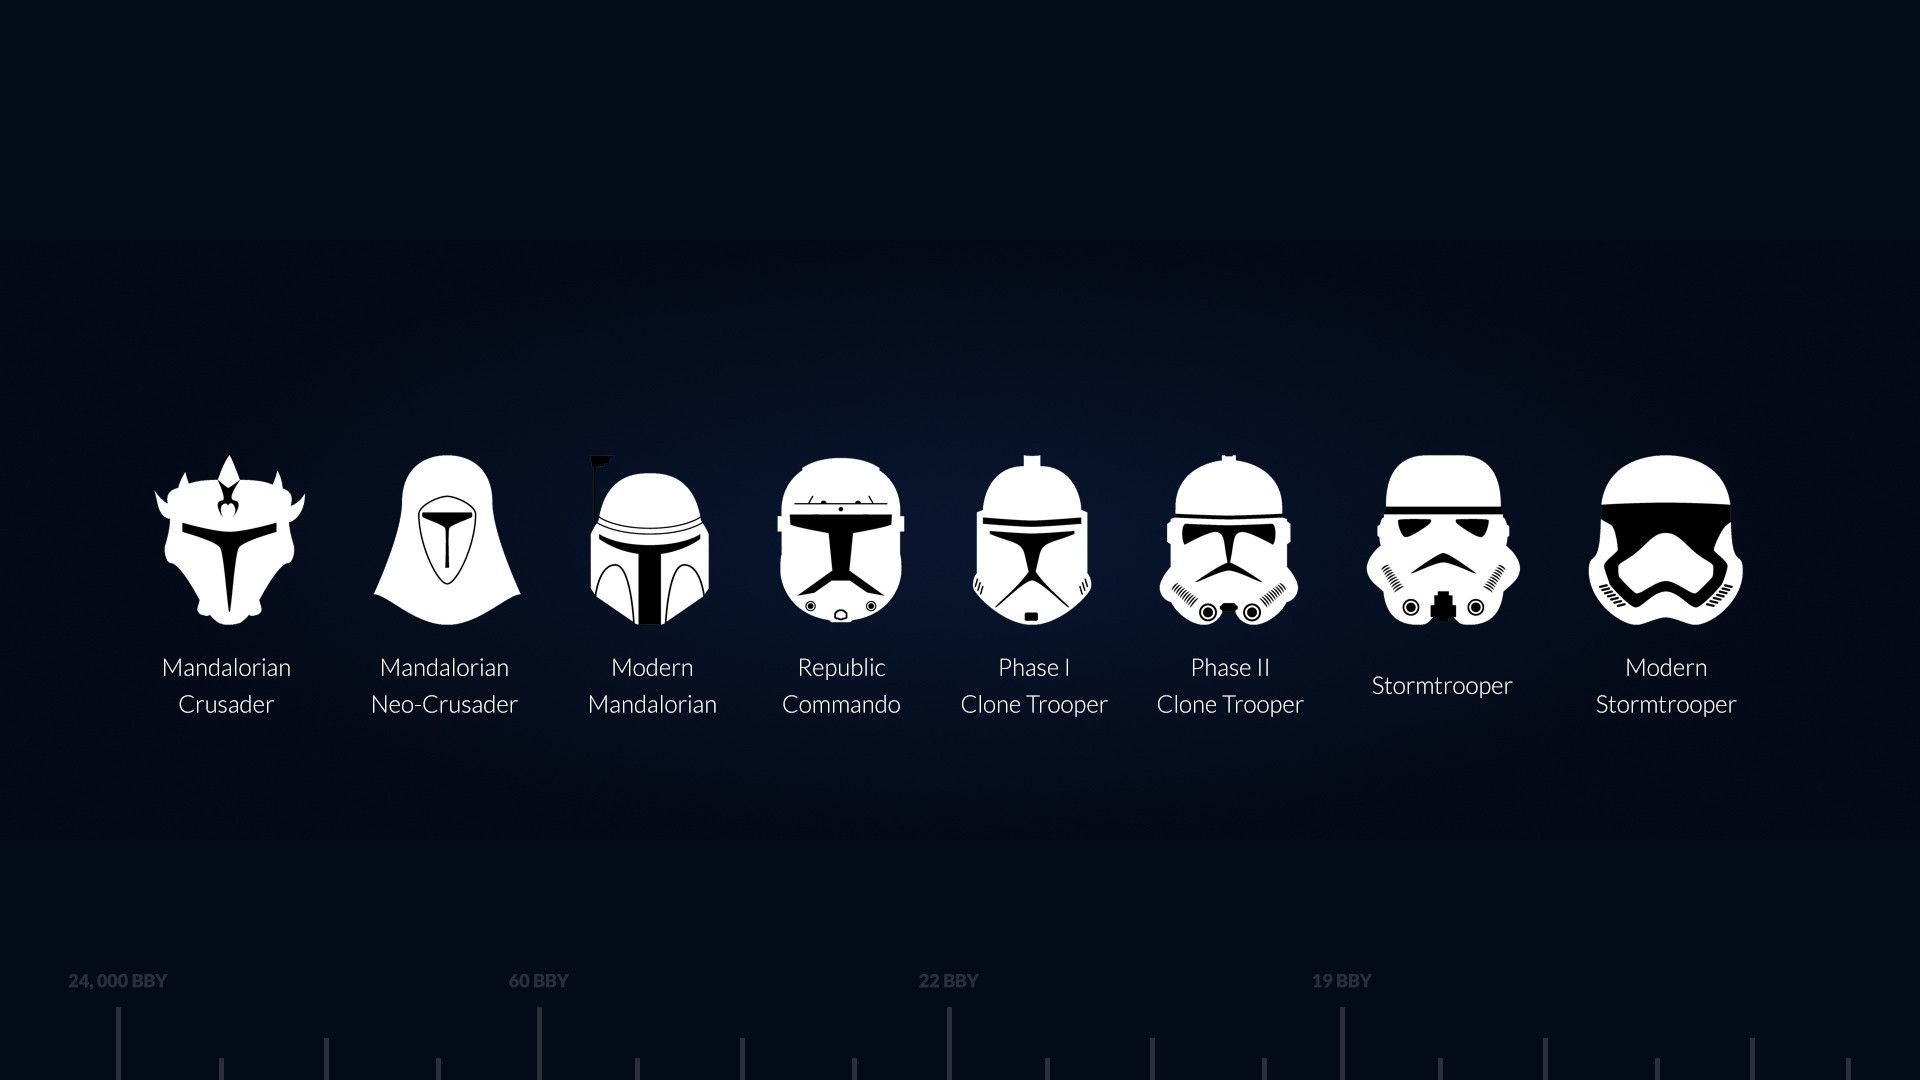 The evolution of star wars characters - Star Wars